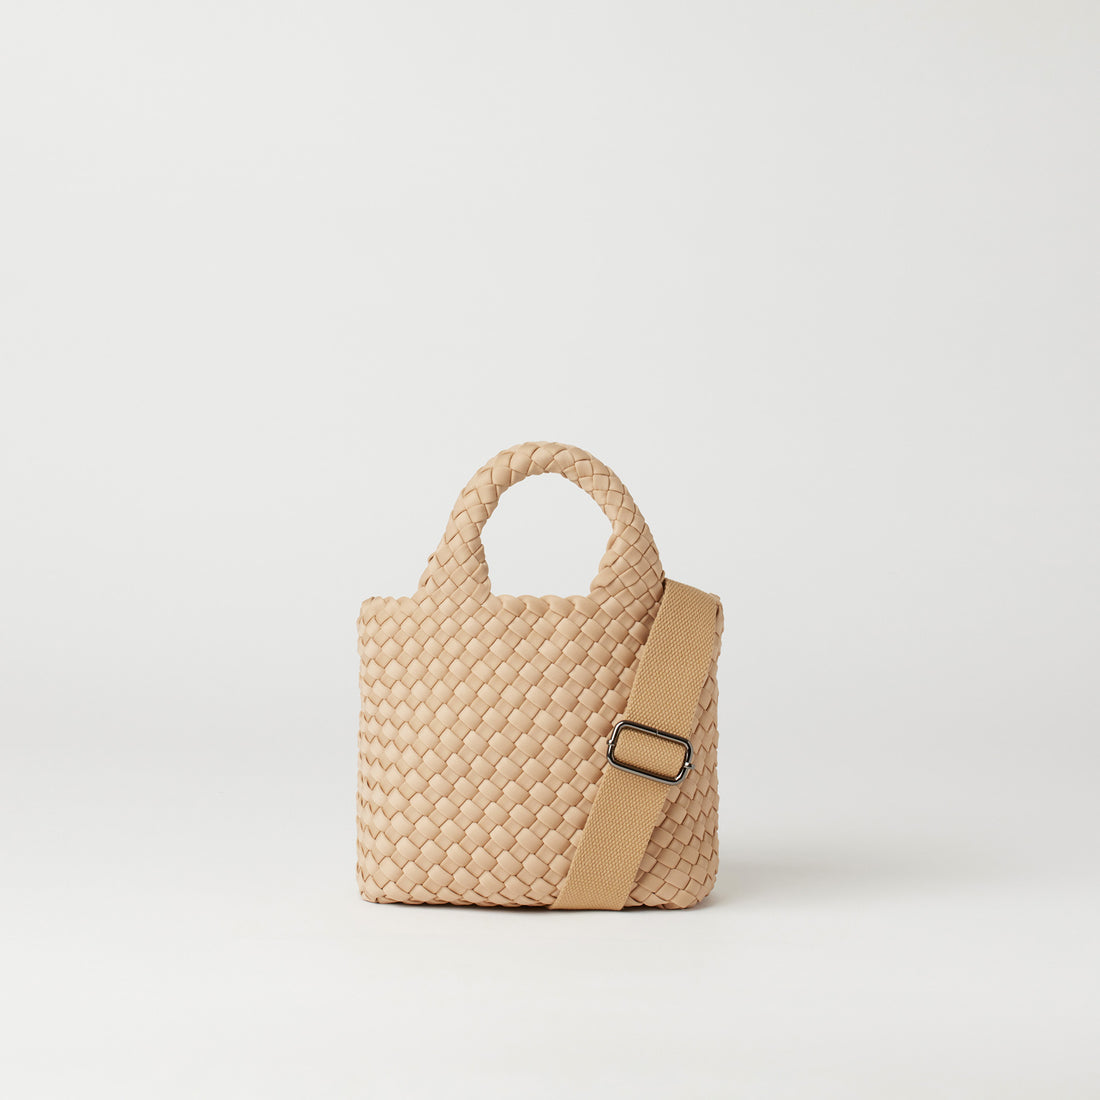 Andreina Bags Lupe crossbody bag in cream colour. small size yet roomy. Handmade, interlaced material, synthetic material, water resistant, machine washable, adjustable strap, lightweight. Can be worn as crossbody or as a handbag. Designed in Sydney, Australia.